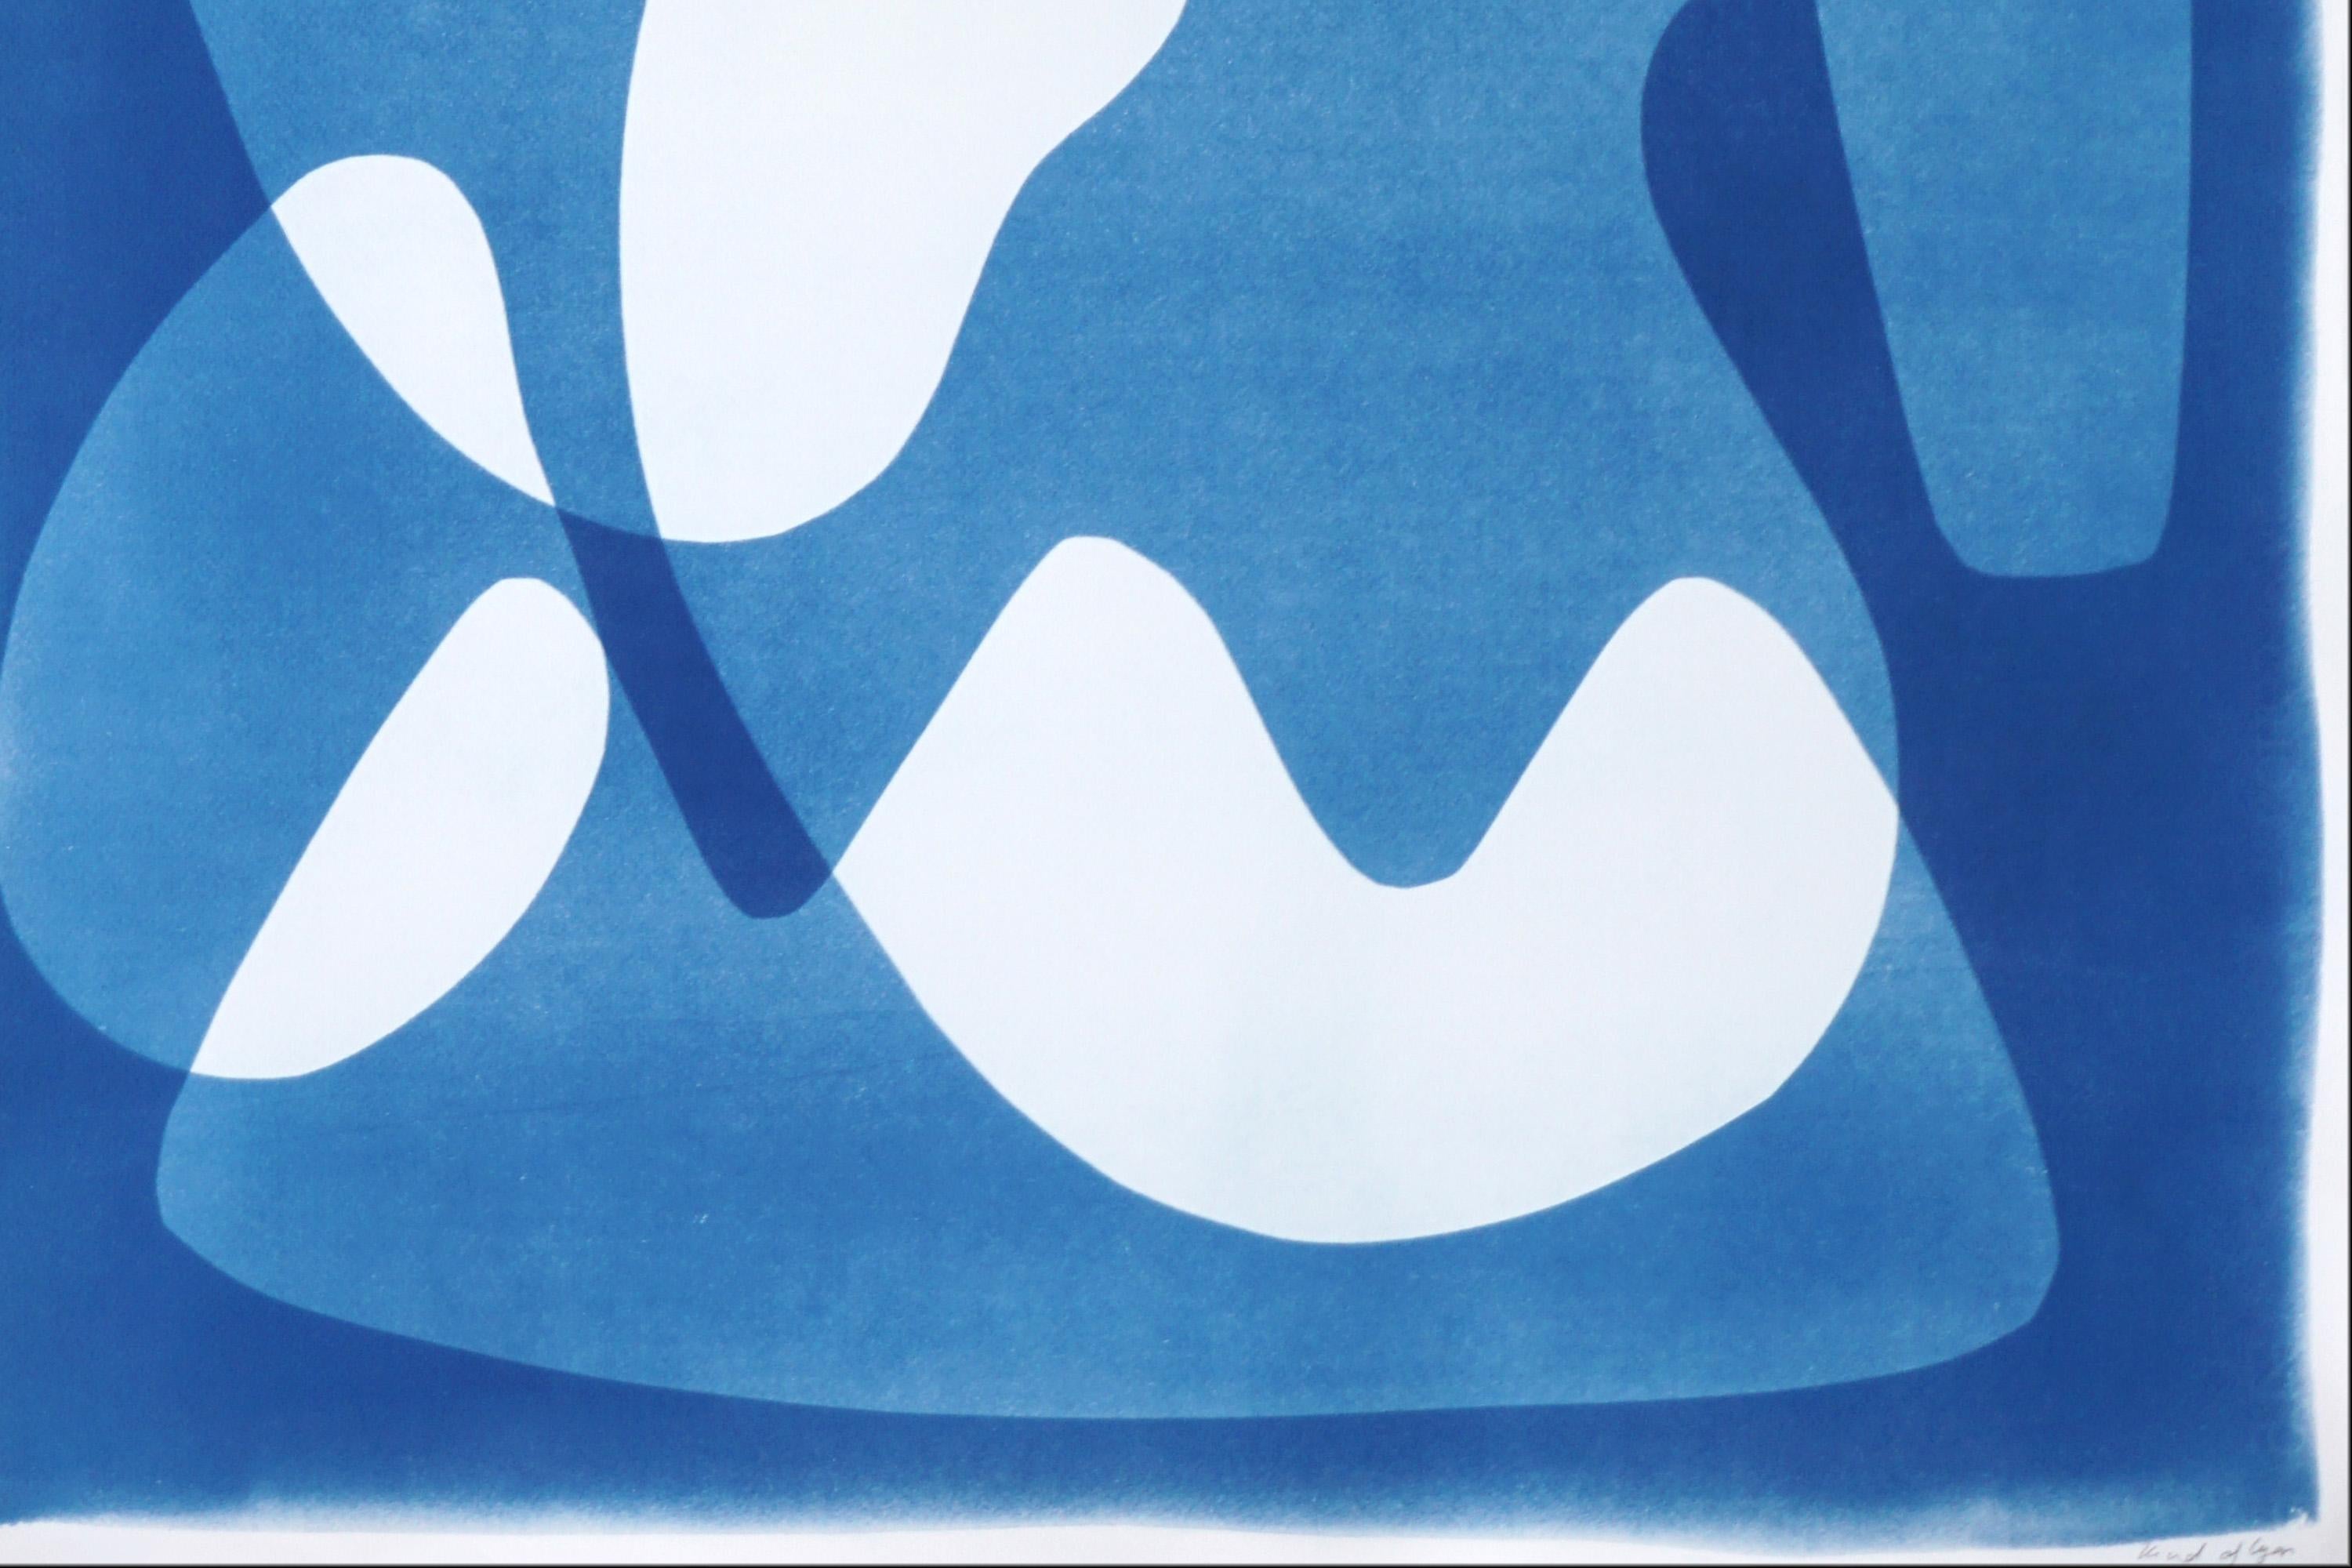 Mid-Century Modern Shapes in White and Blue, Handmade Cyanotype, Unique Monotype For Sale 4